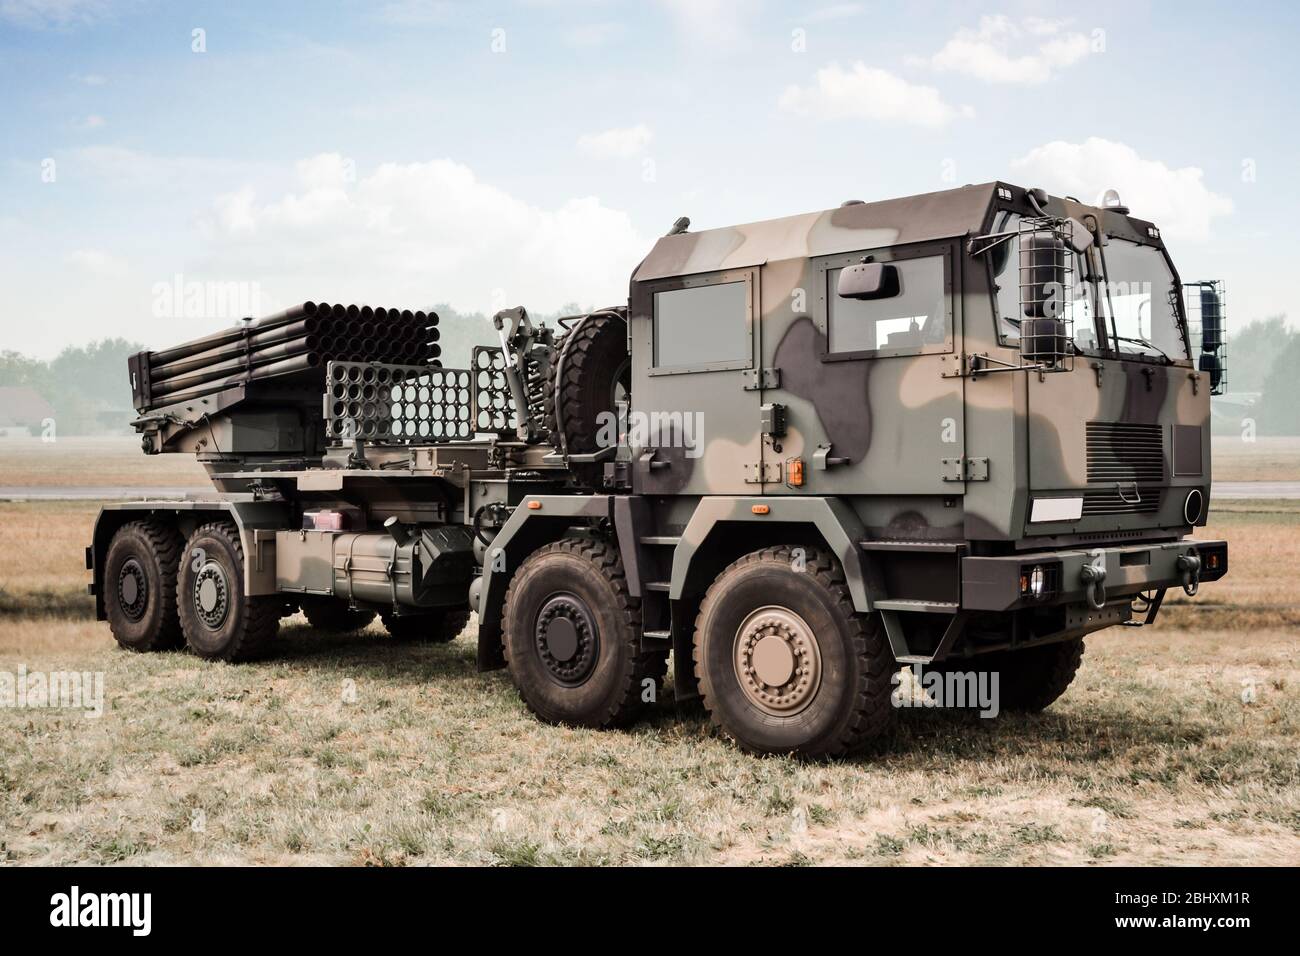 Radom, Mazowieckie / Poland - August 23, 2015: Heavy military truck with missile launcher/ missile unit (antiaircraft system) - military industry, mod Stock Photo